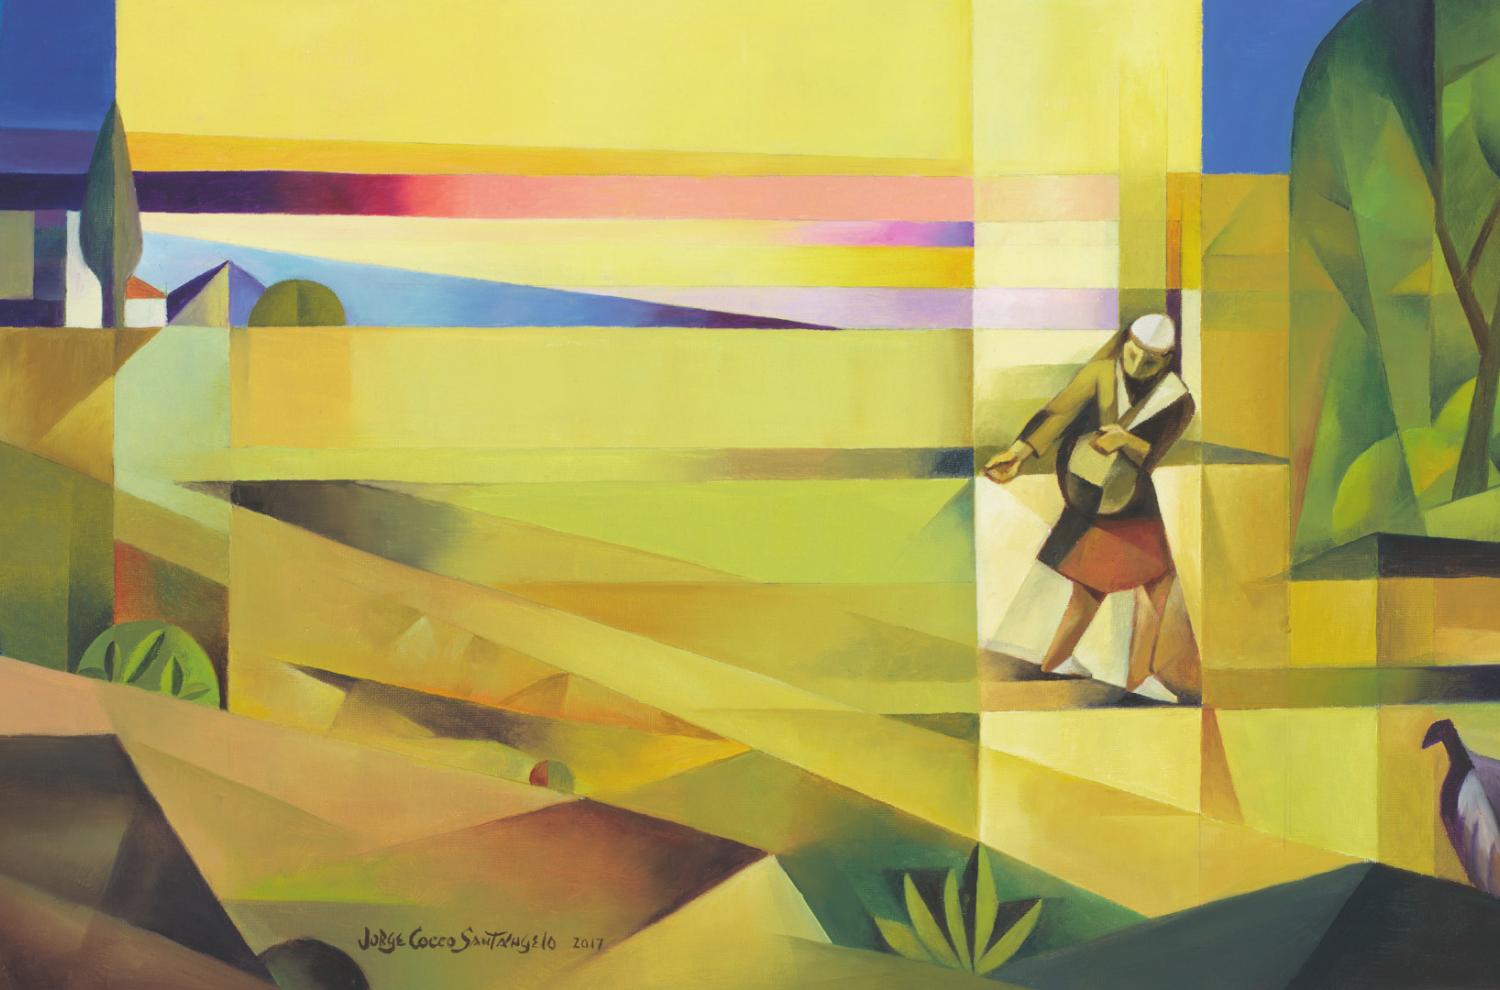 Jorge Cocco's painting, "The Sower," which depicts a man walking with a bag of seeds and tossing them into soil along his path, as described in Jesus's parable.